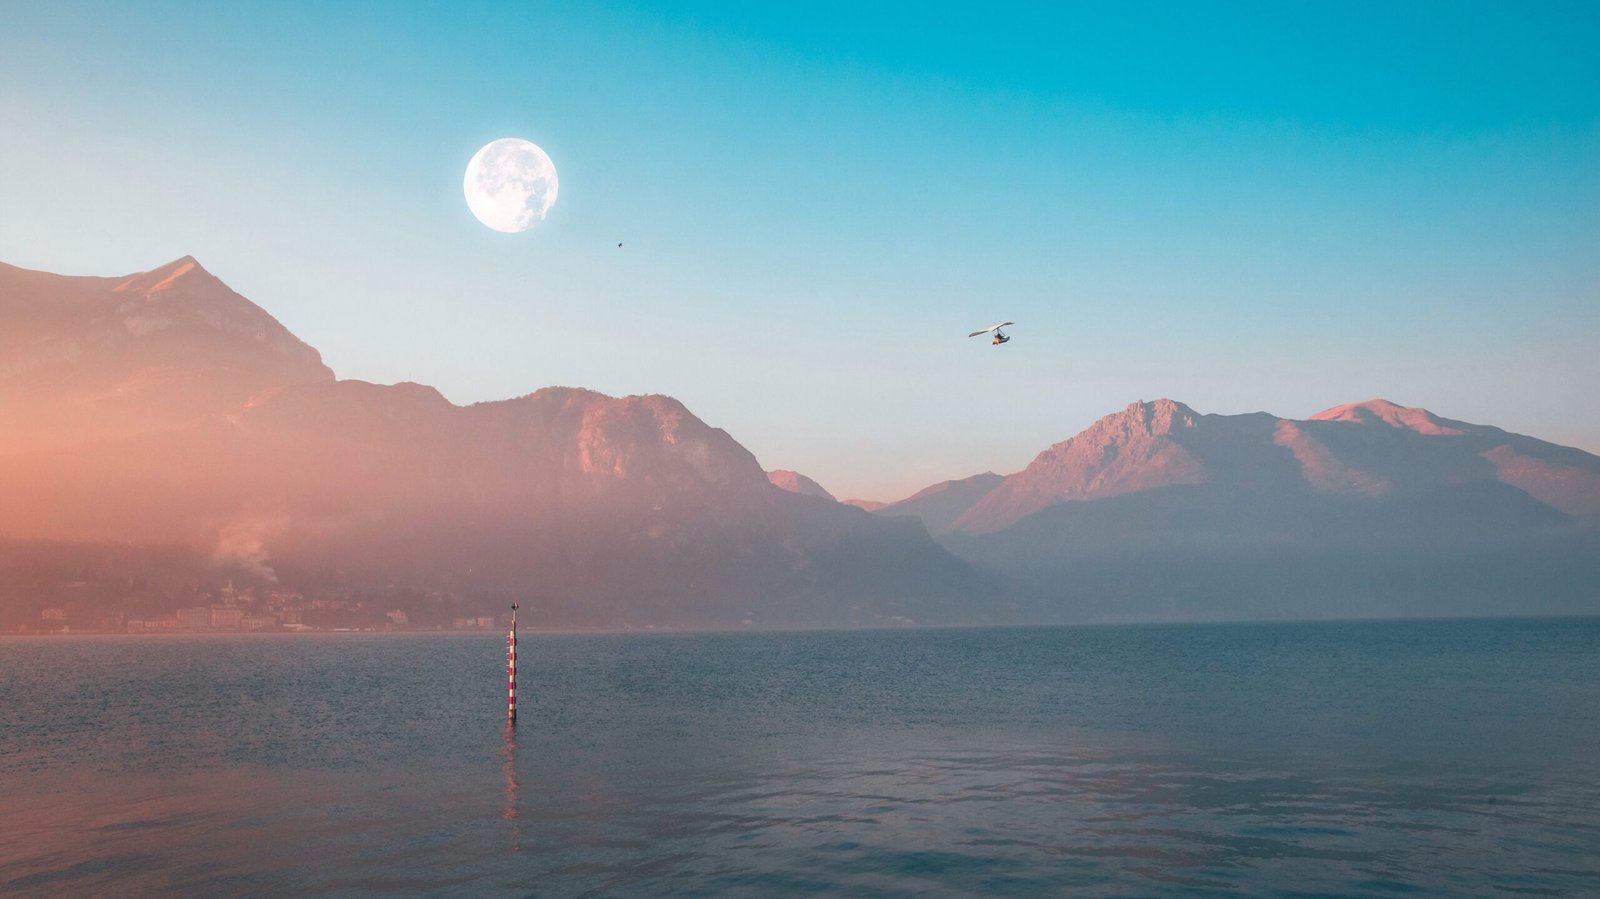 A dreamlike horizon with mountains a moon and someone flying